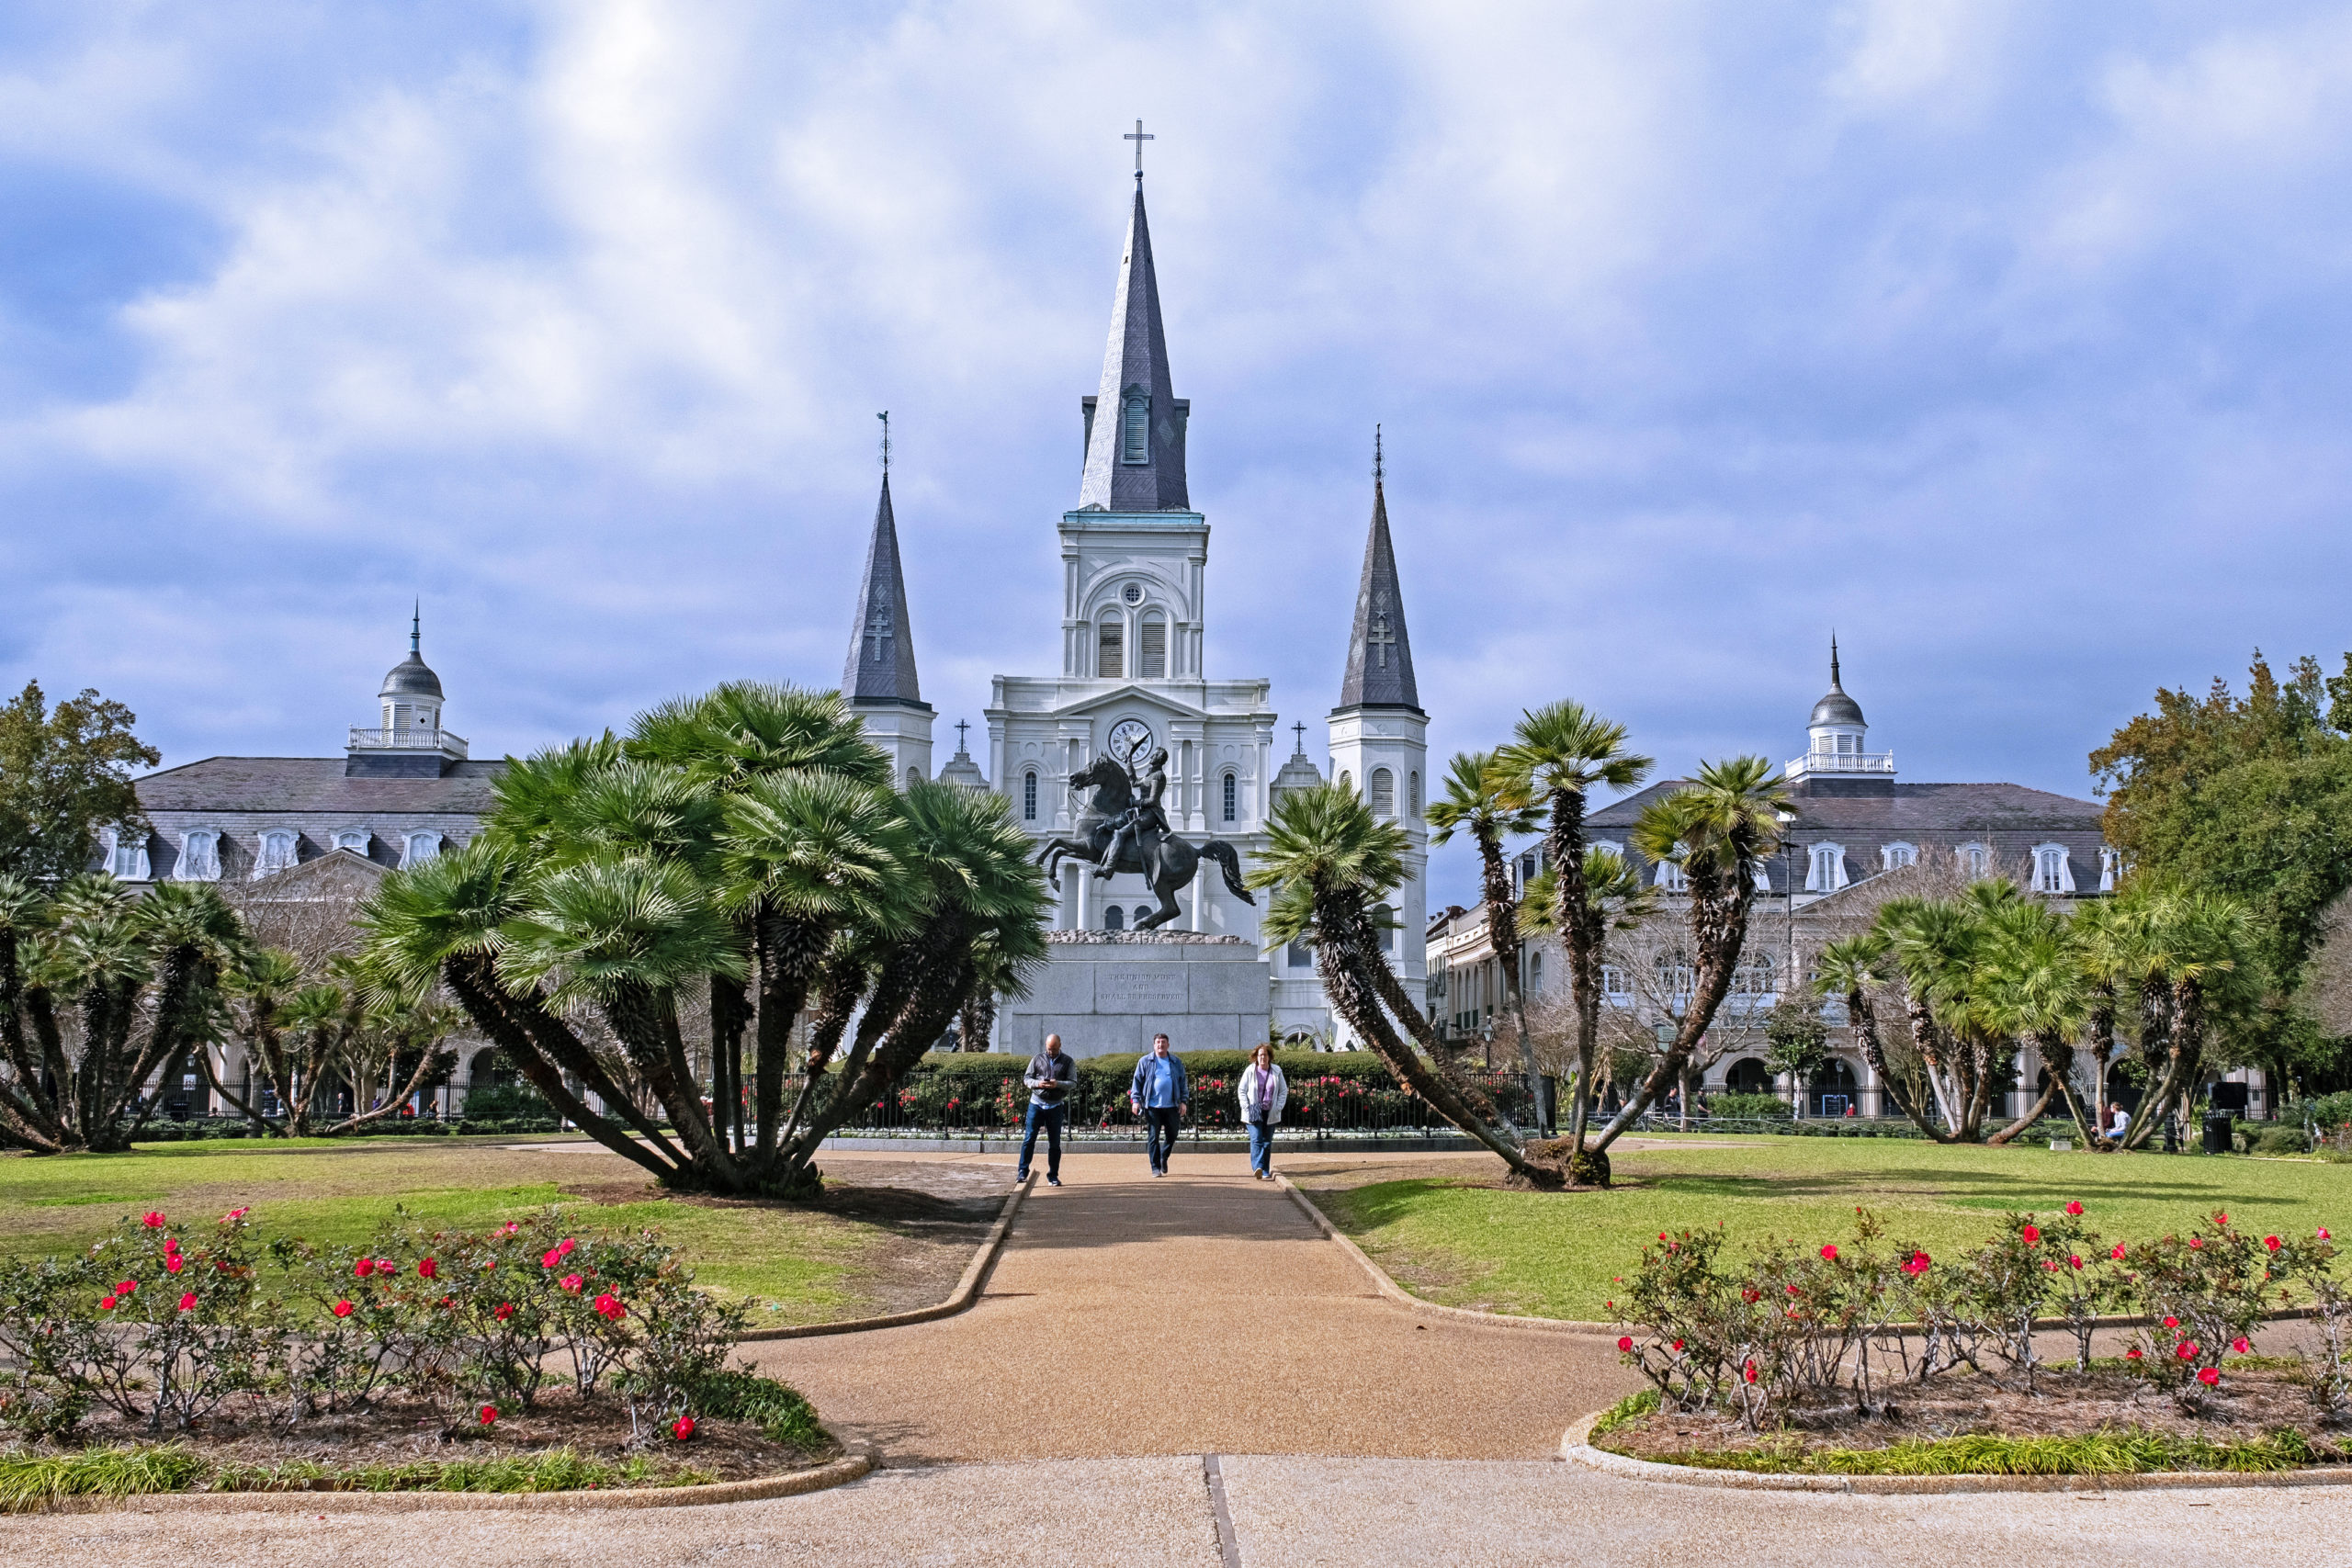 Jackson equestrian statue and St. Louis Cathedral on Jackson Square